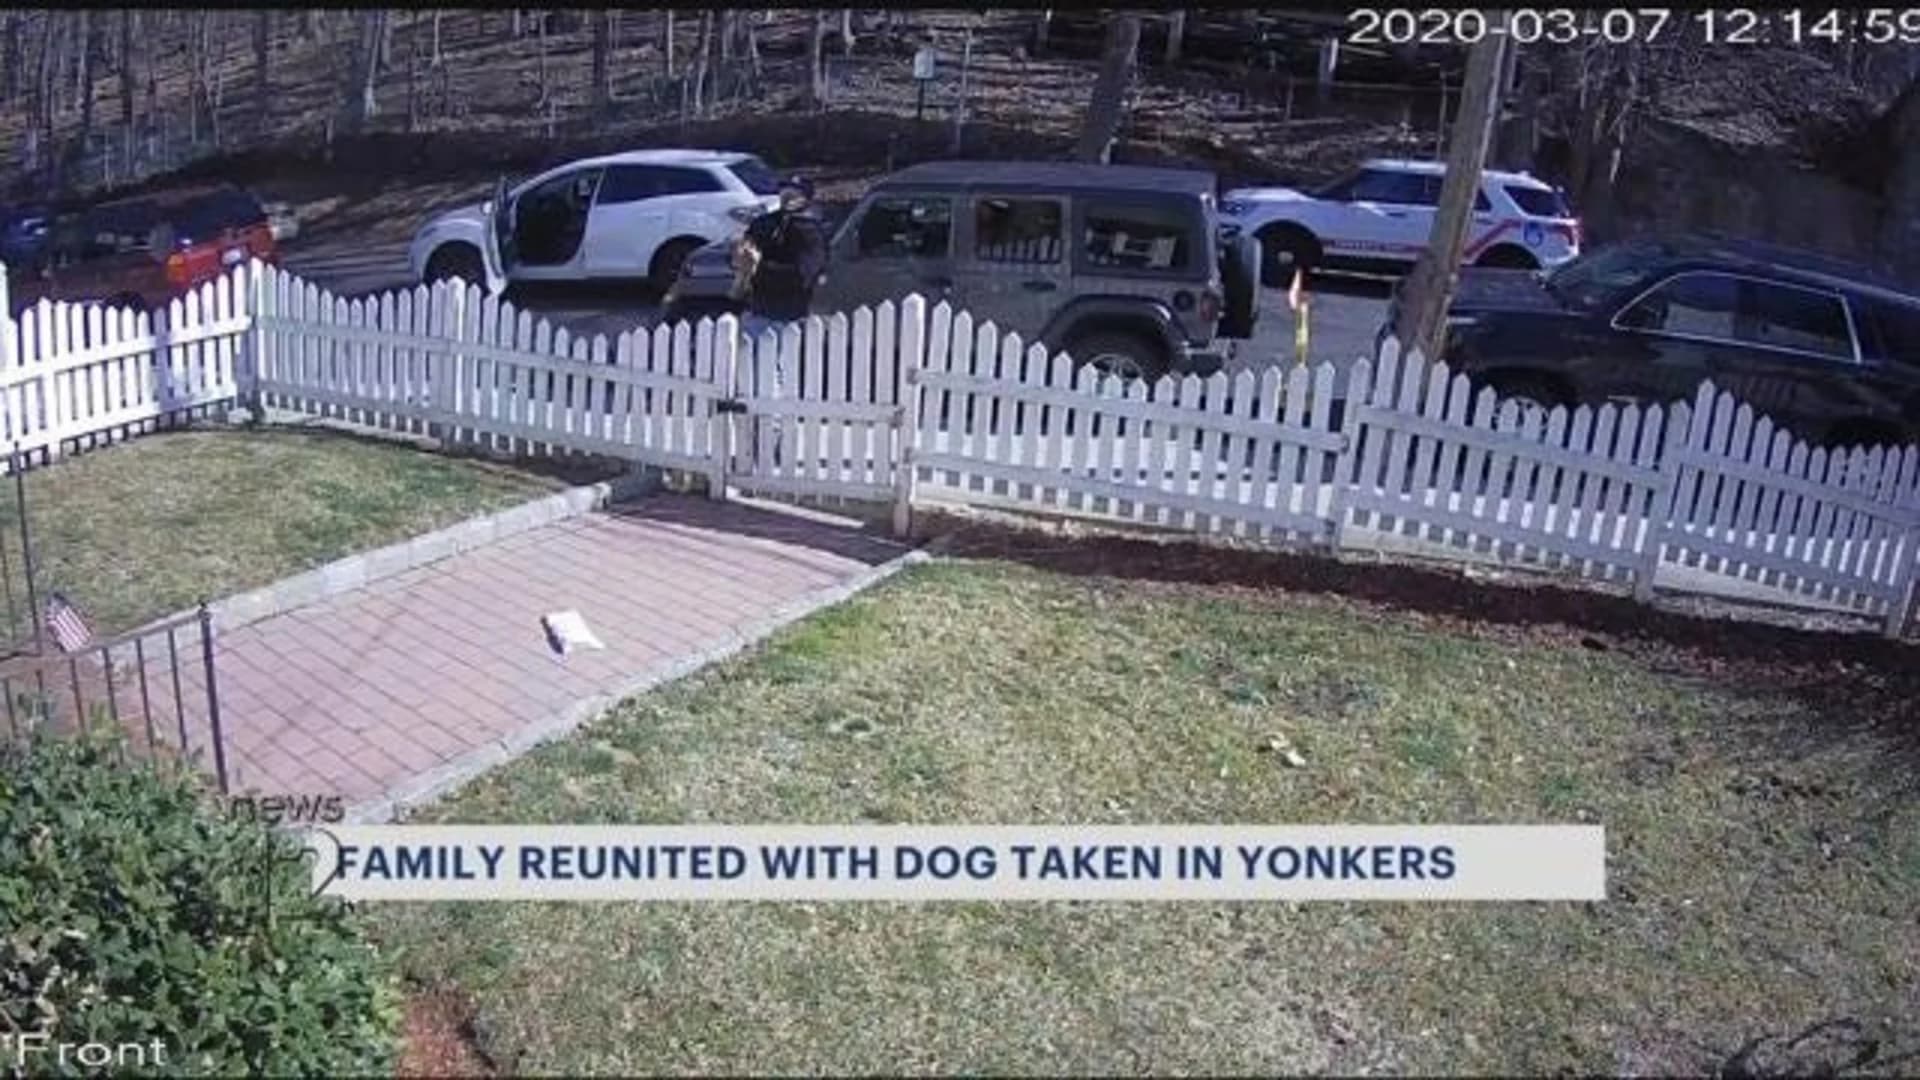 Dog returned safely in Yonkers after News 12 report